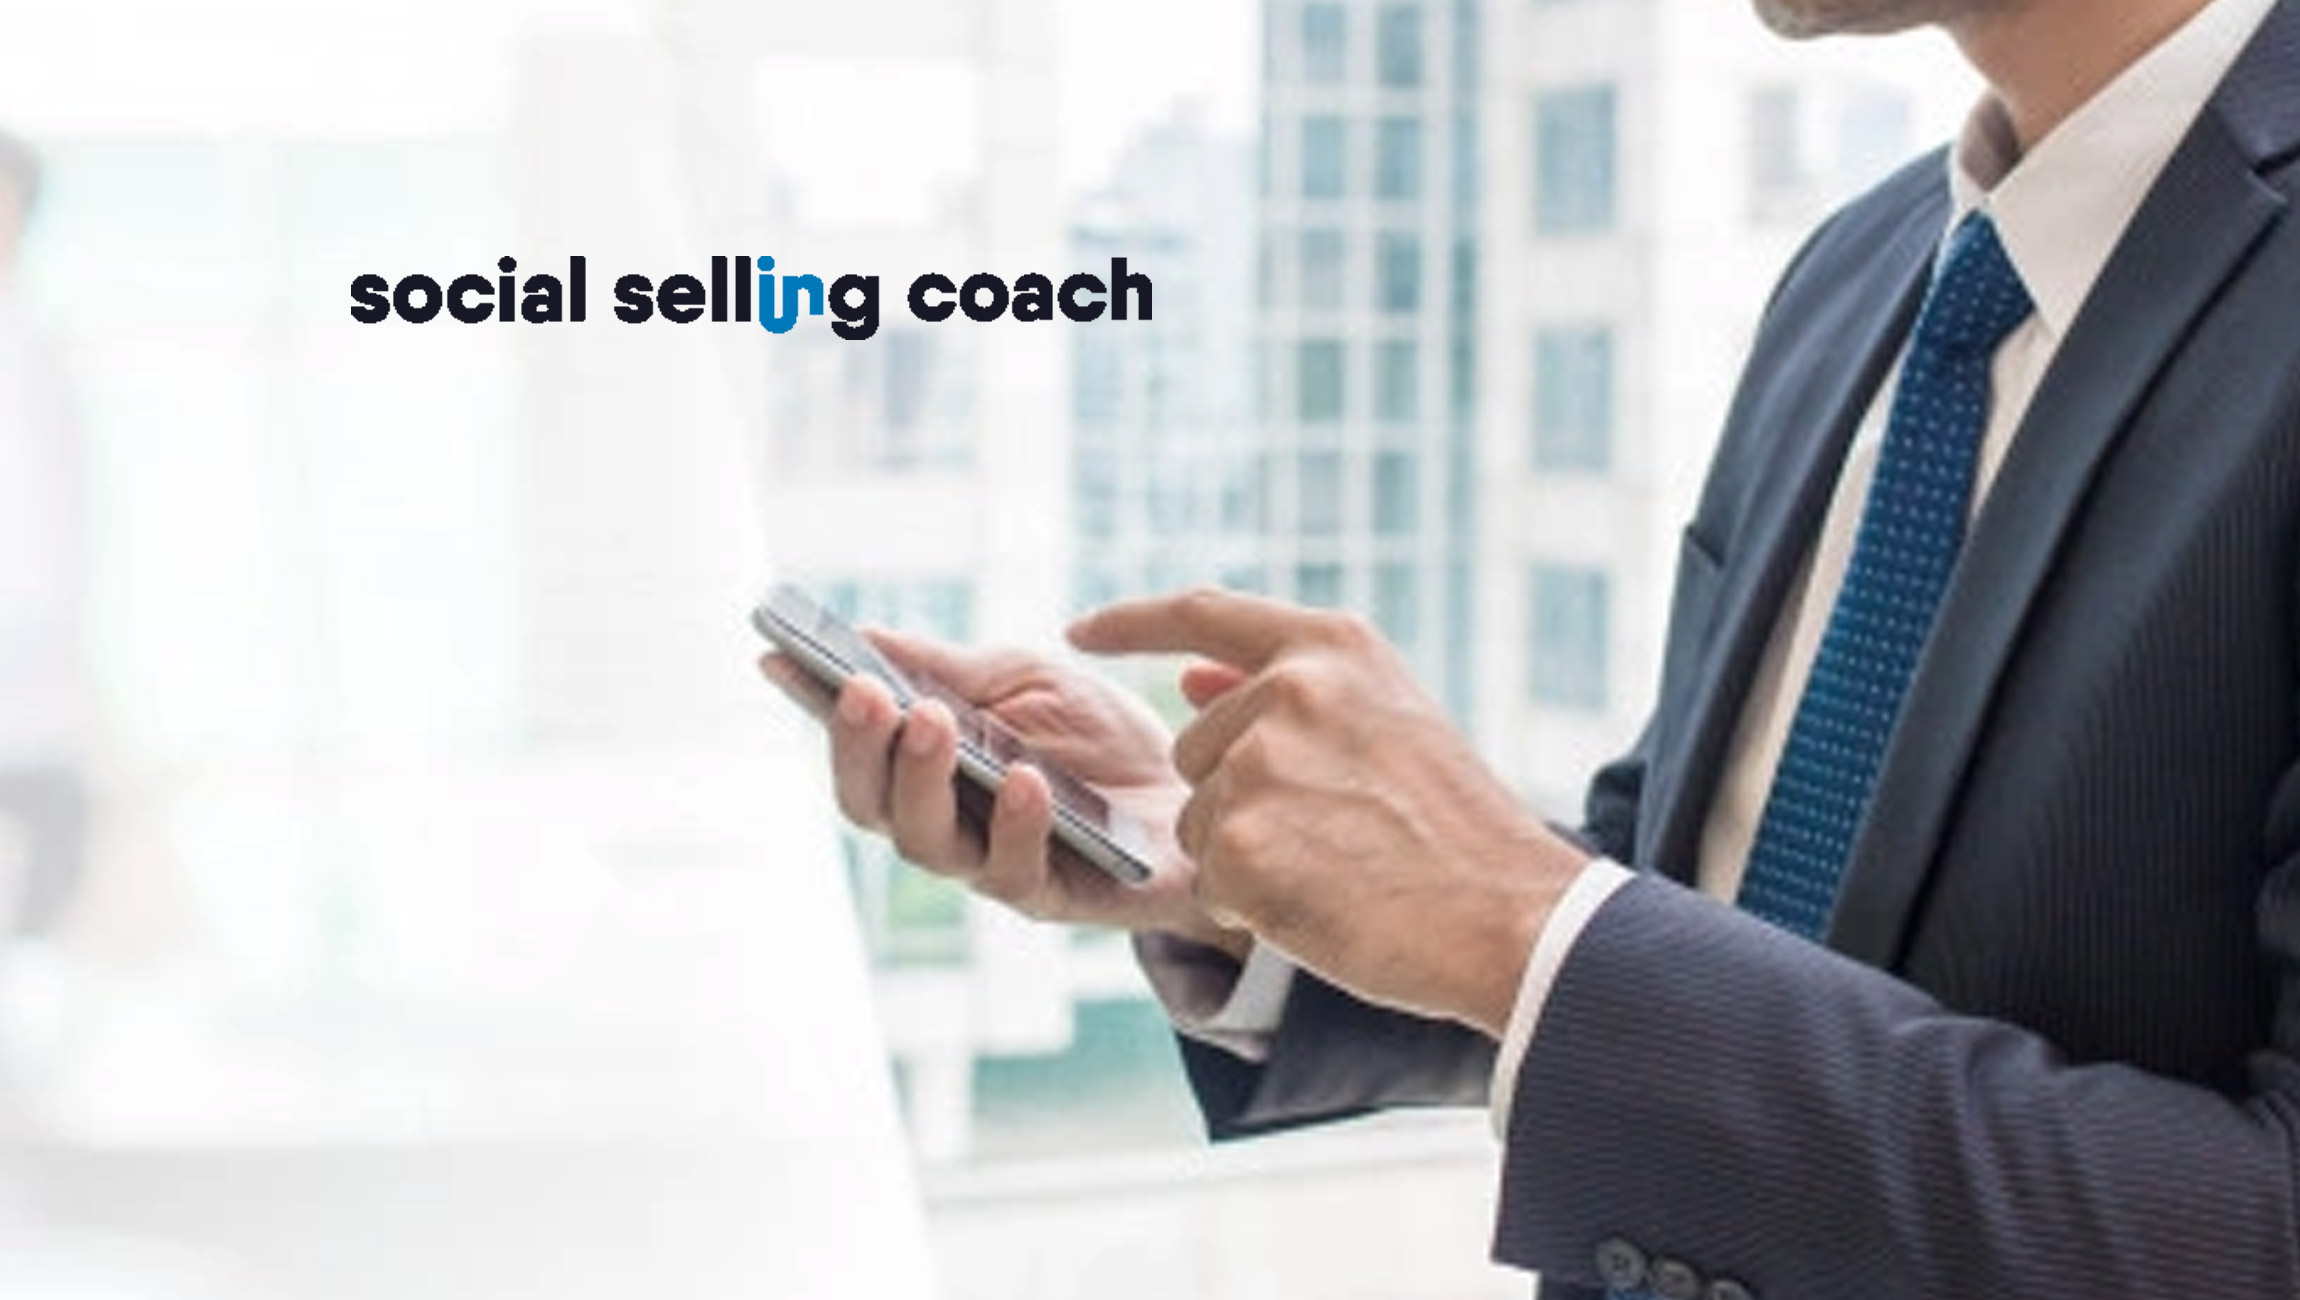 Social-Selling-Coach-Launches-New-AI-Based-Platform-to-Help-Companies-Build-Brands-on-LinkedIn